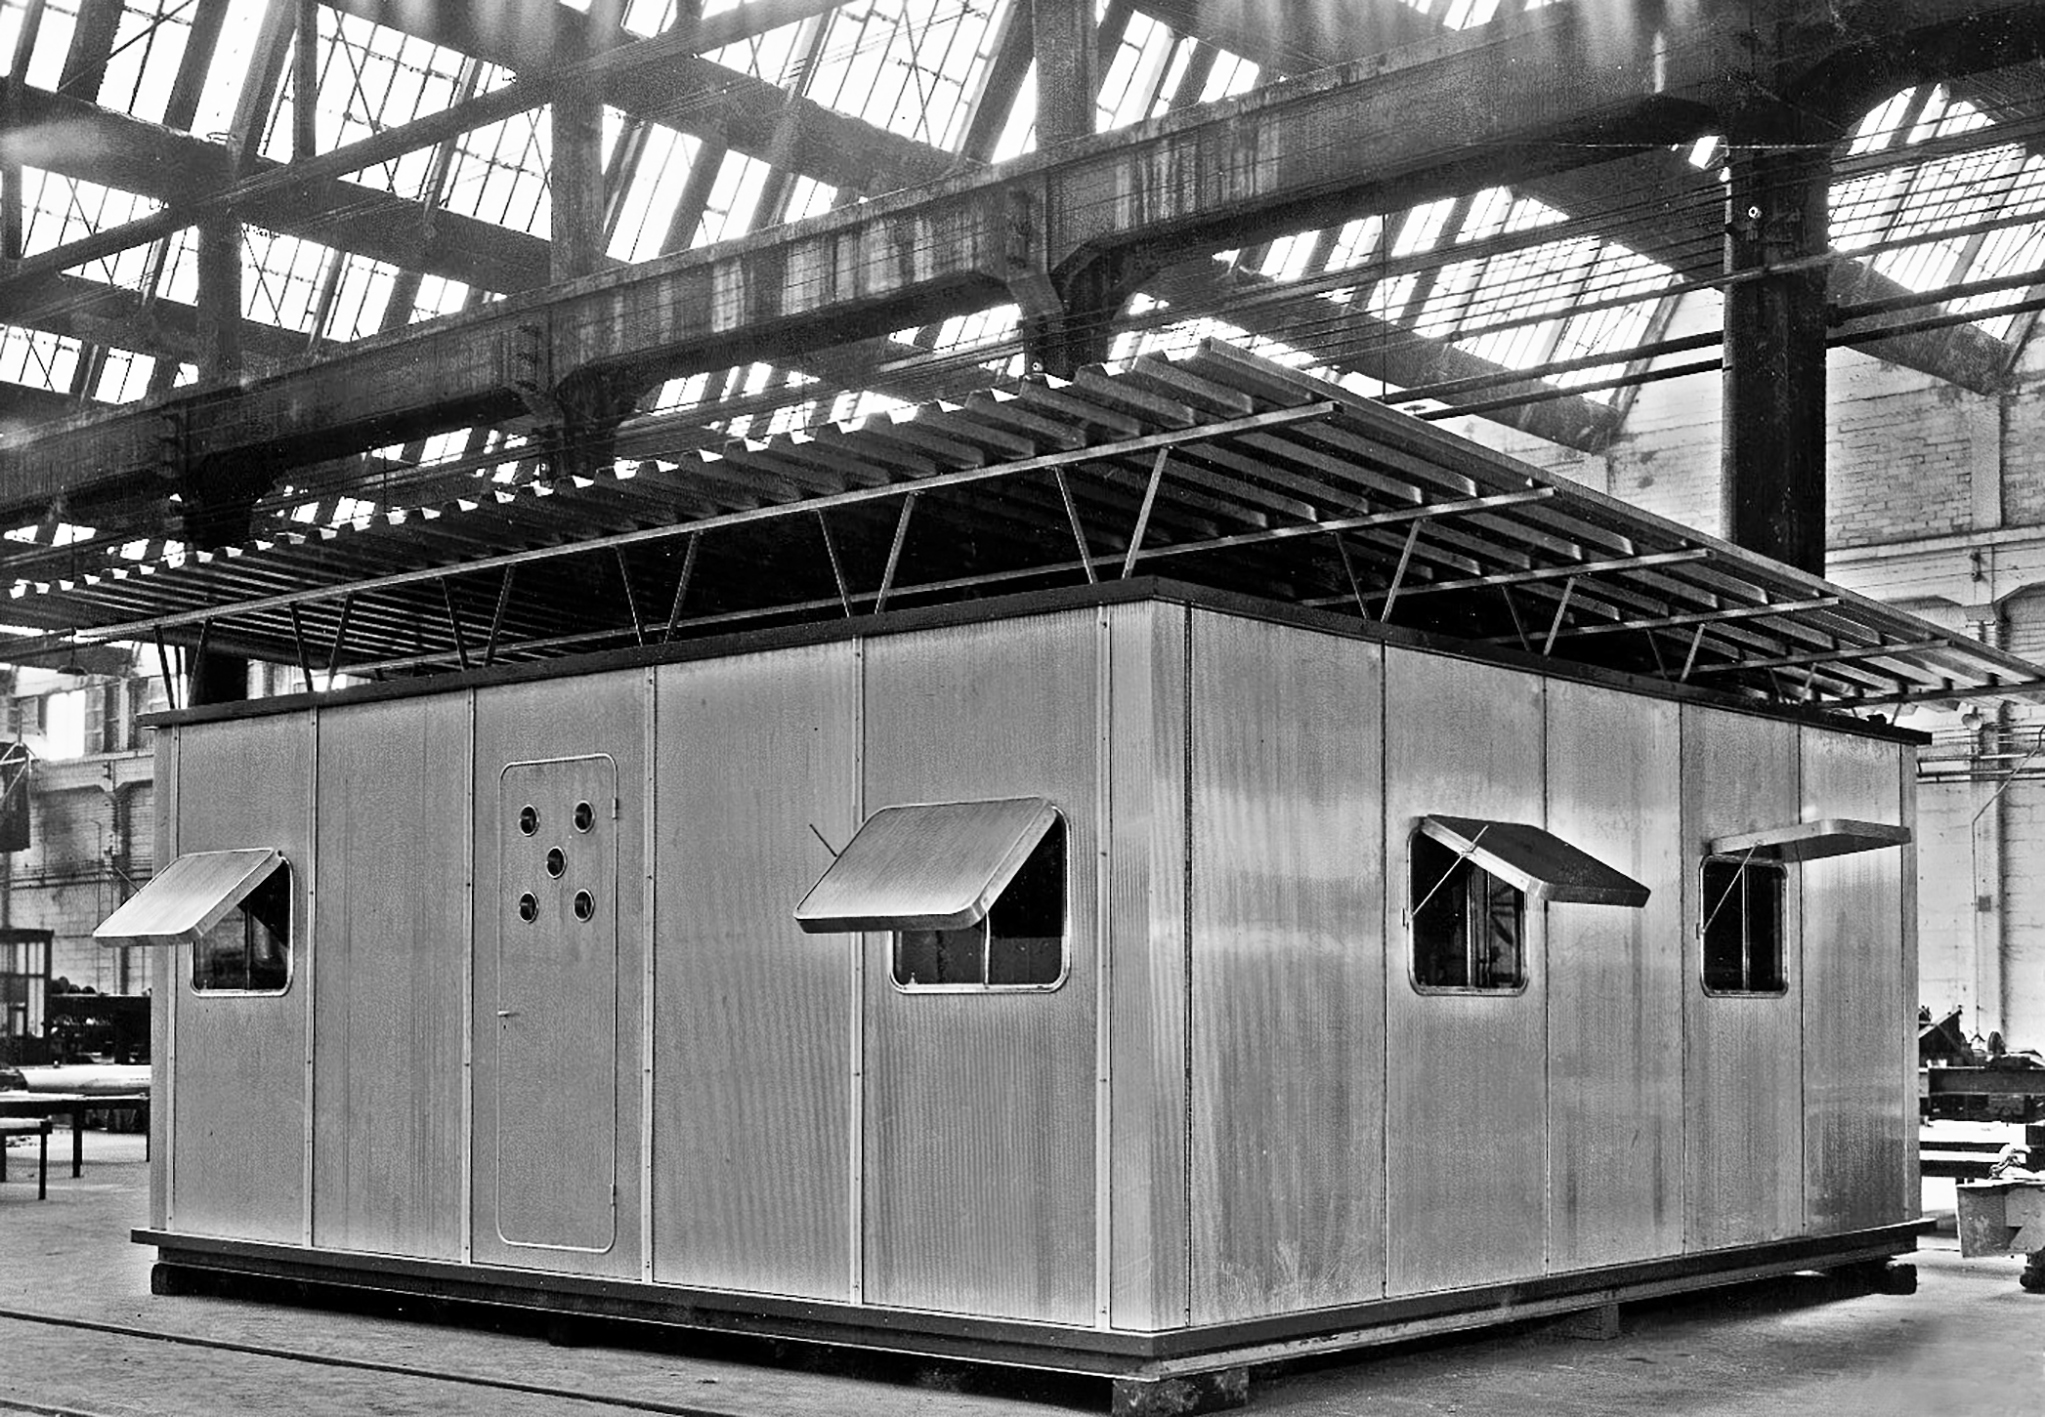 Saharan housing, 1957 (CIMT-Jean Prouvé). Light, demountable and can be equipped as needed: accommodation, sanitary unit, bar, sitting room, dining room, offices, etc. Photo of a cabin in the CIMT factory.